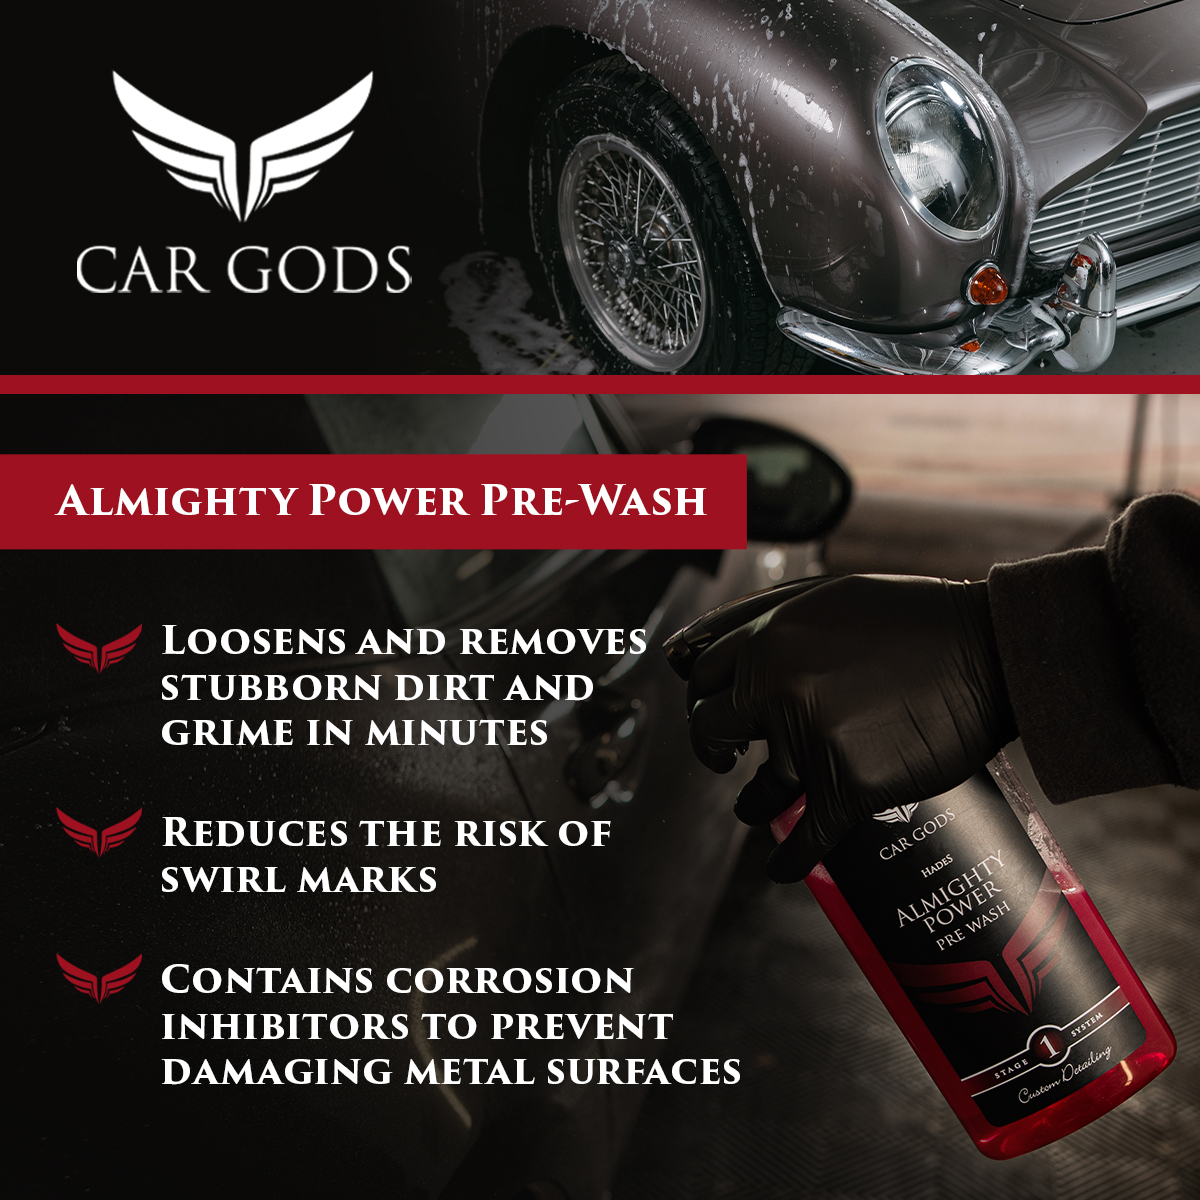 Car Gods Almighty Power Pre-Wash. Reduce the risk of swirl marks by loosening and removing stubborn dirt and grime. Contains corrosion inhibitors to prevent damage to metal surfaces.